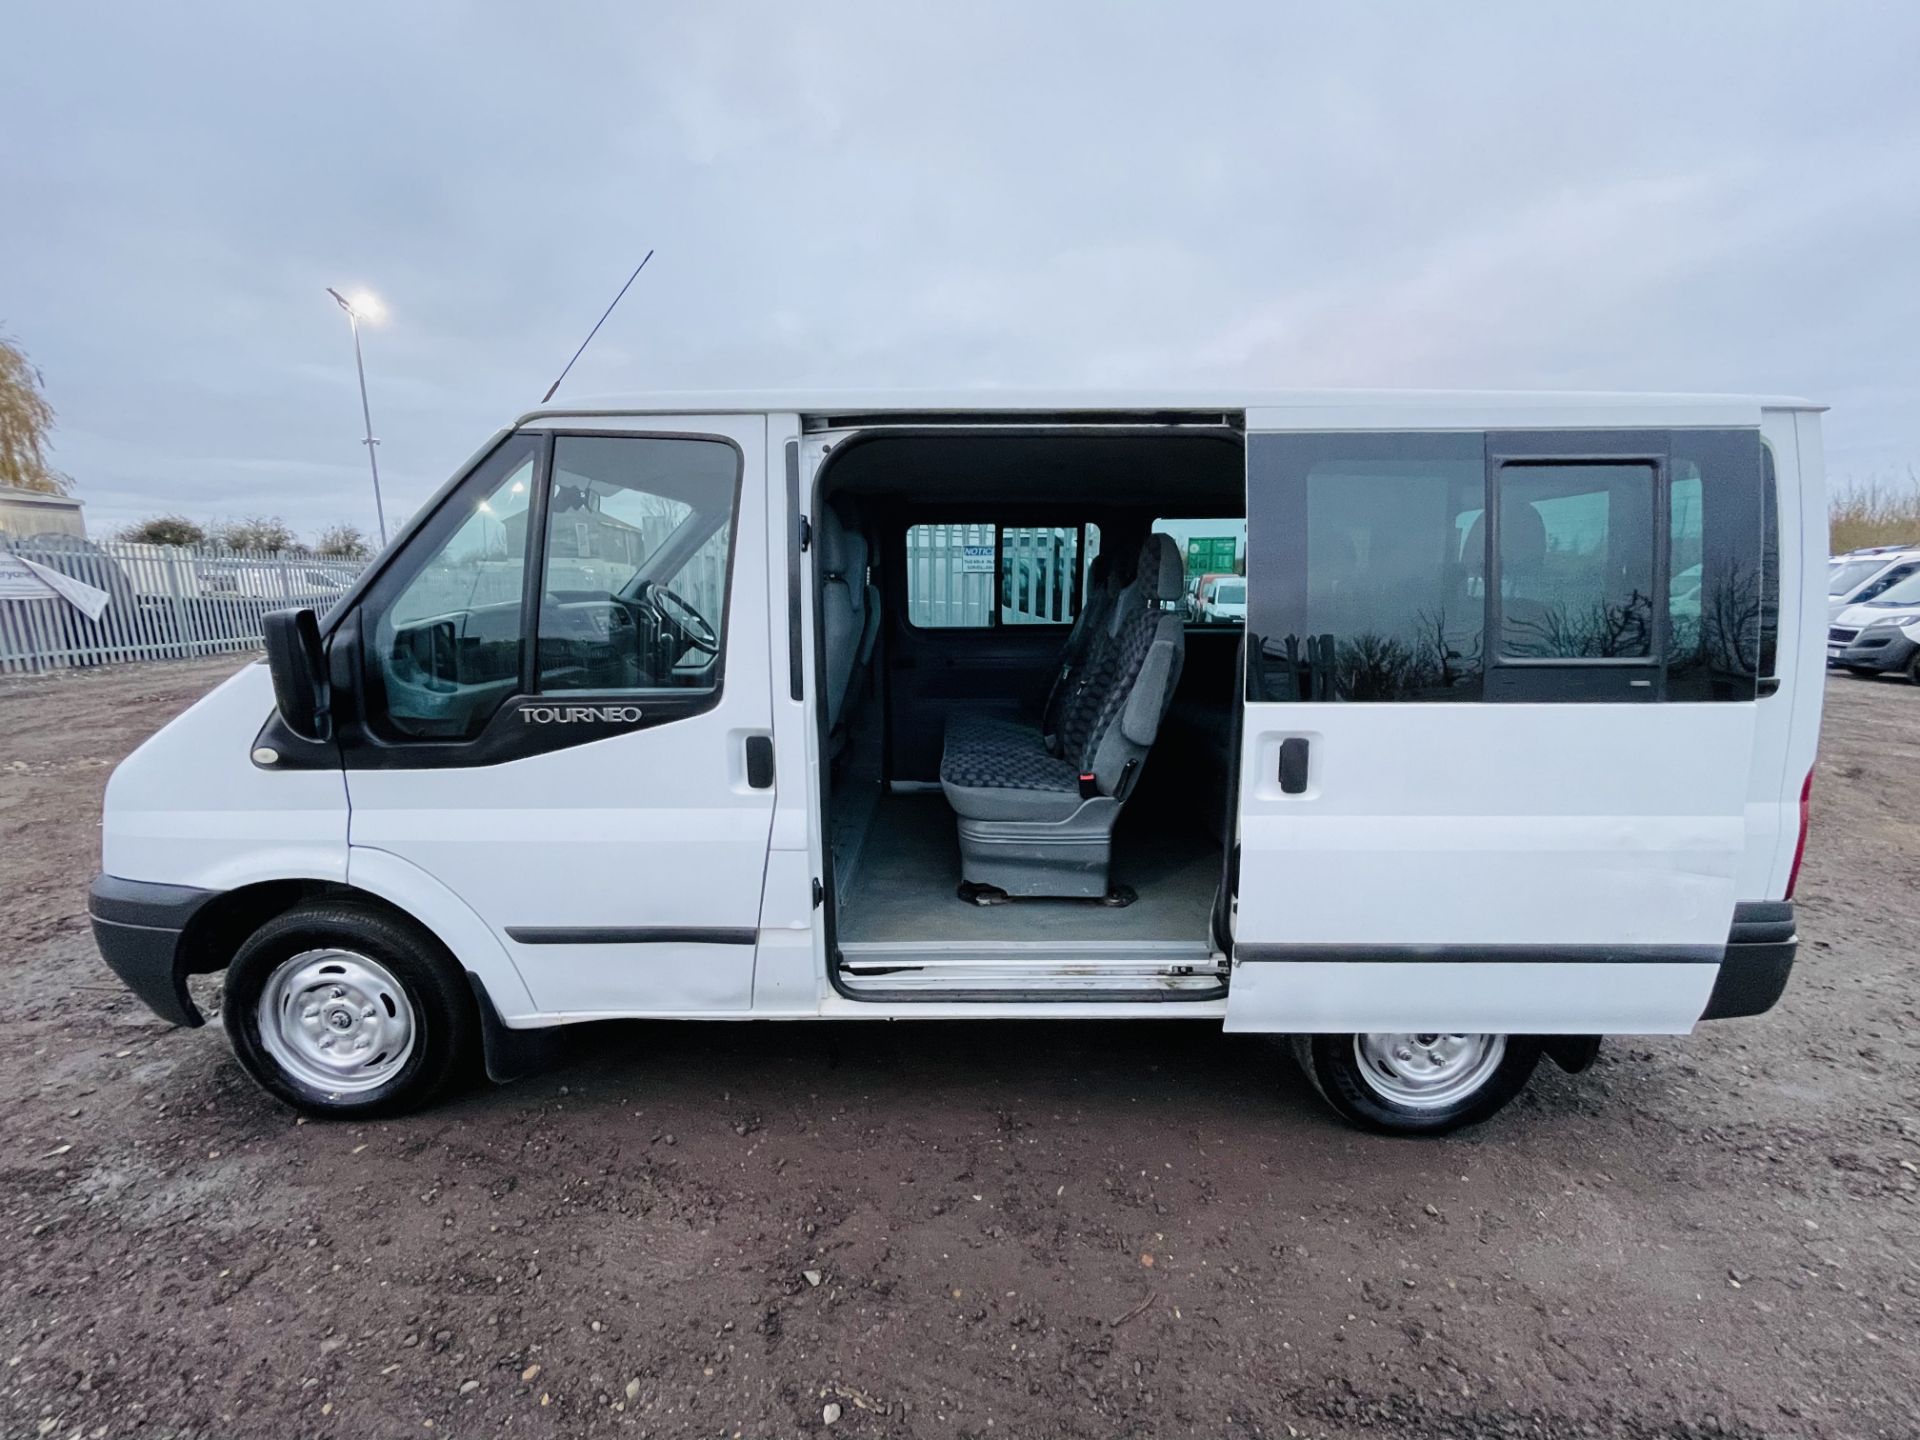 ** ON SALE ** Ford Transit Toureno 2.2 TDCI Trend 2013 '13 Reg' 9 seats - Air Con - Cruise Control** - Image 9 of 25